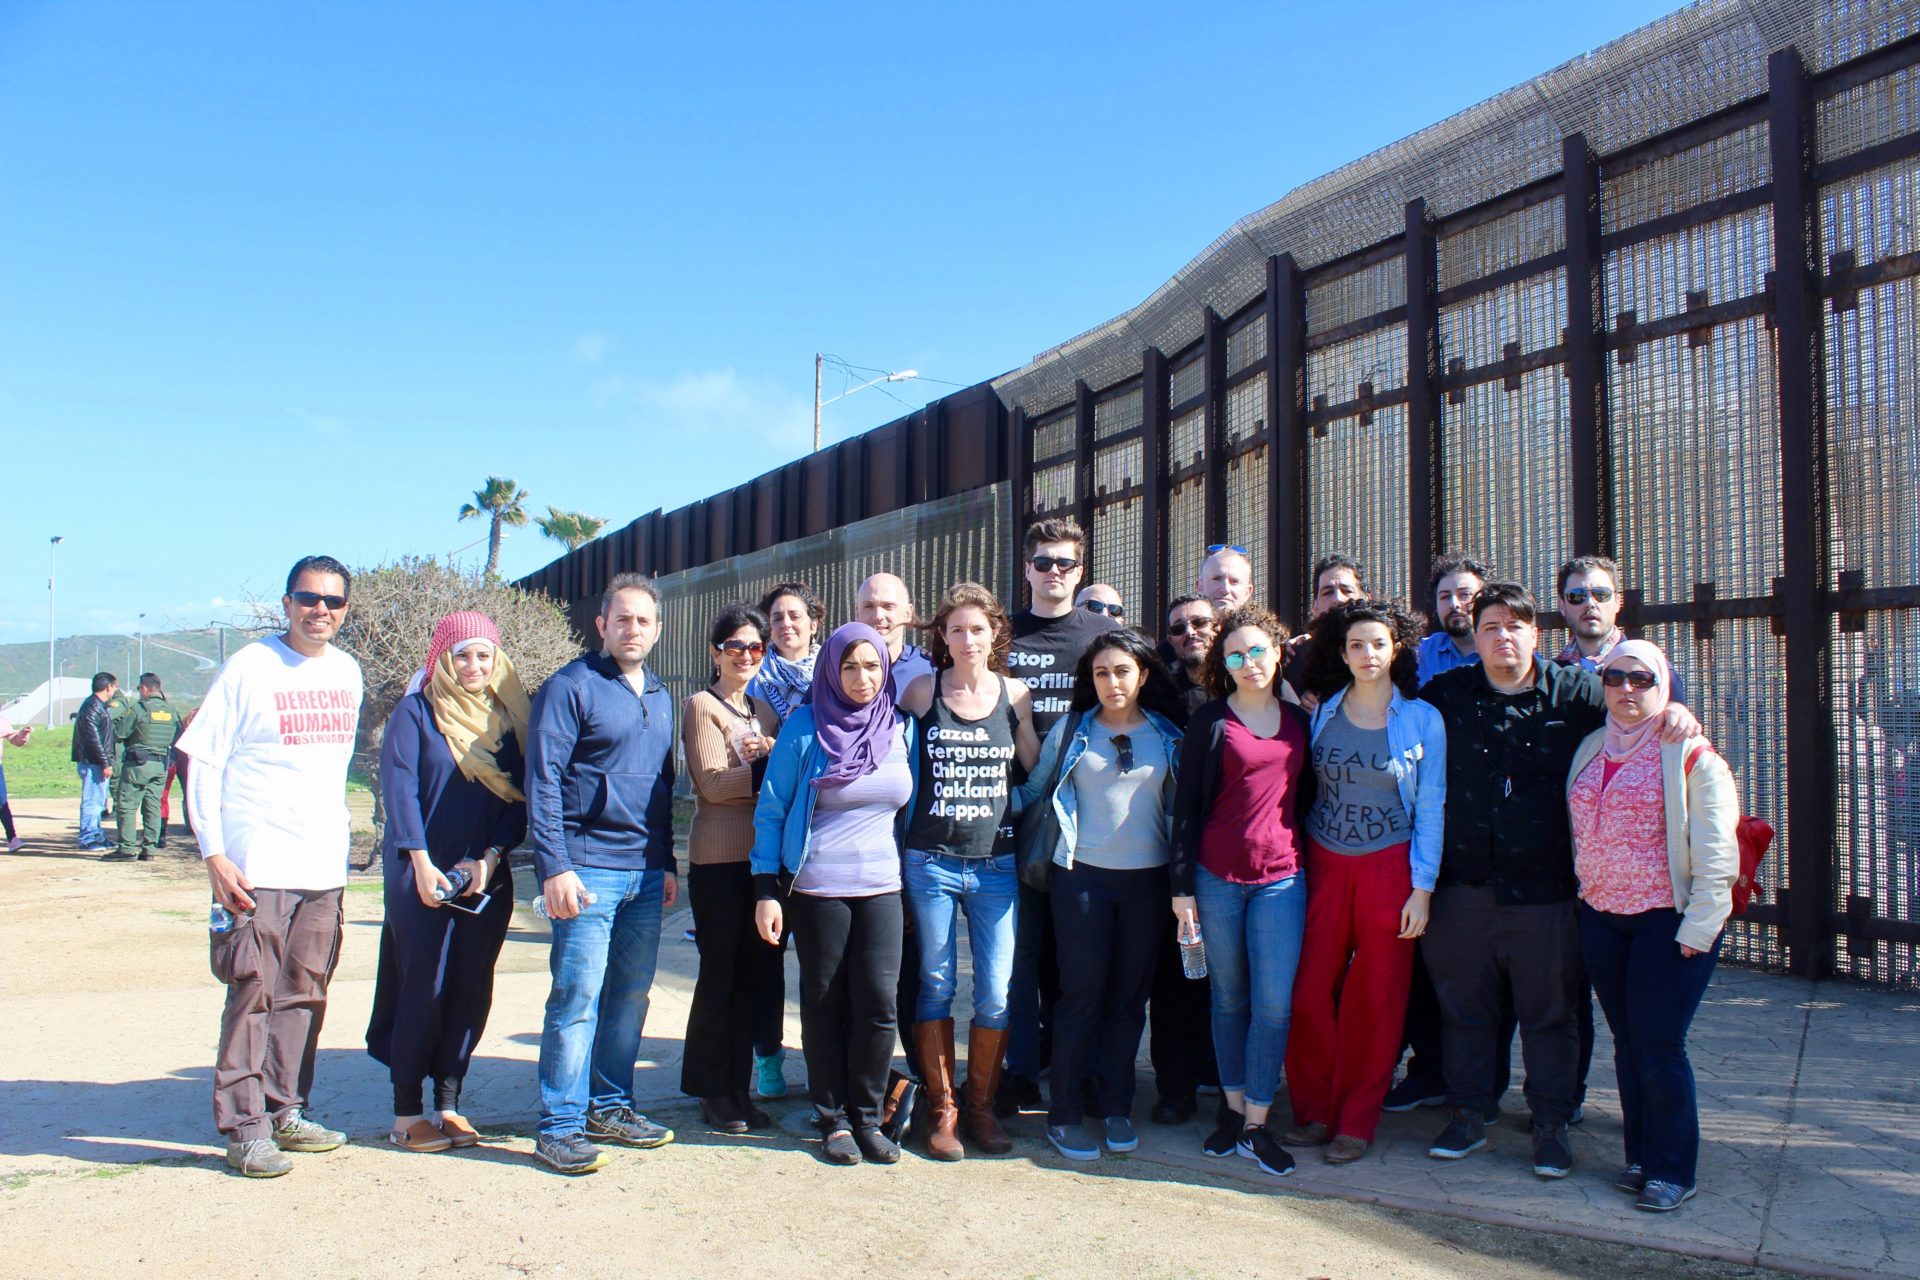 In February 2017, the staff and Steering Committee of the US Campaign for the Palestinian Rights traveled from San Diego, CA to the U.S./Mexico border to see for ourselves what is happening at the border.